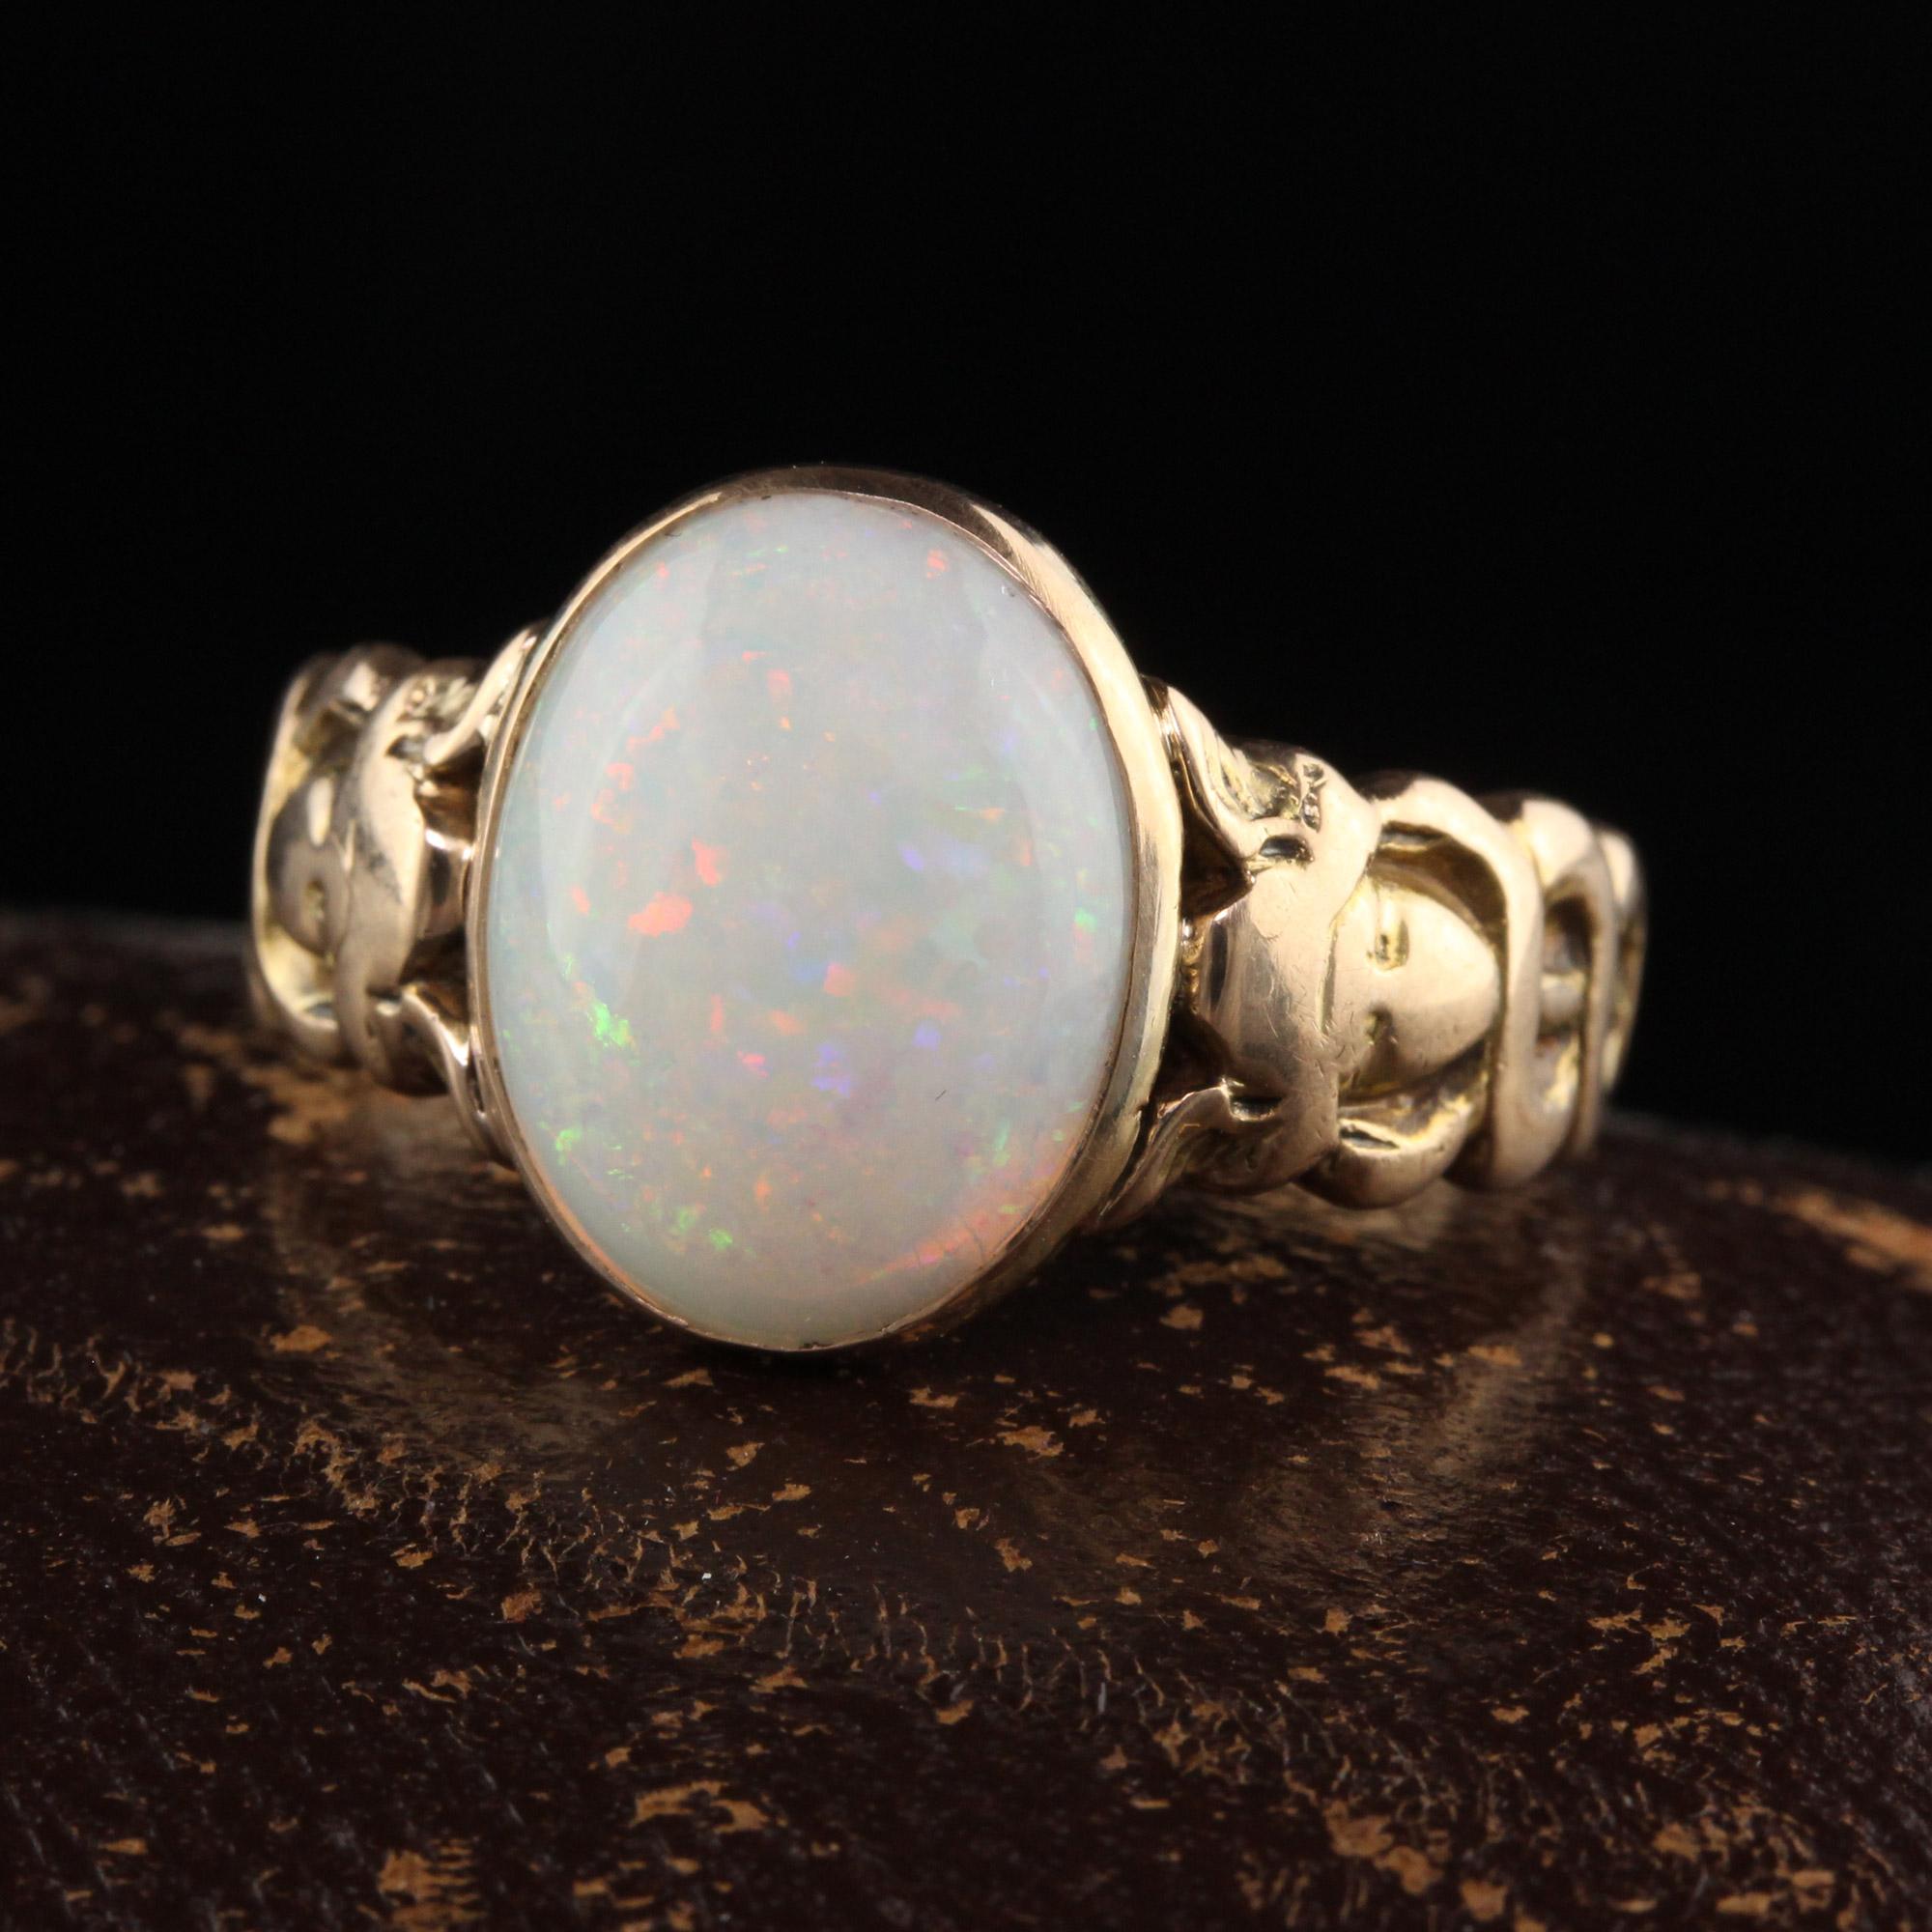 Beautiful Antique Victorian 15K Yellow Gold Opal Asclepios Carved Ring. This gorgeous opal Victorian ring is crafted in 15K yellow gold. The center is a beautiful white opal cabochon with beautiful play of color that is set in a Victorian mounting